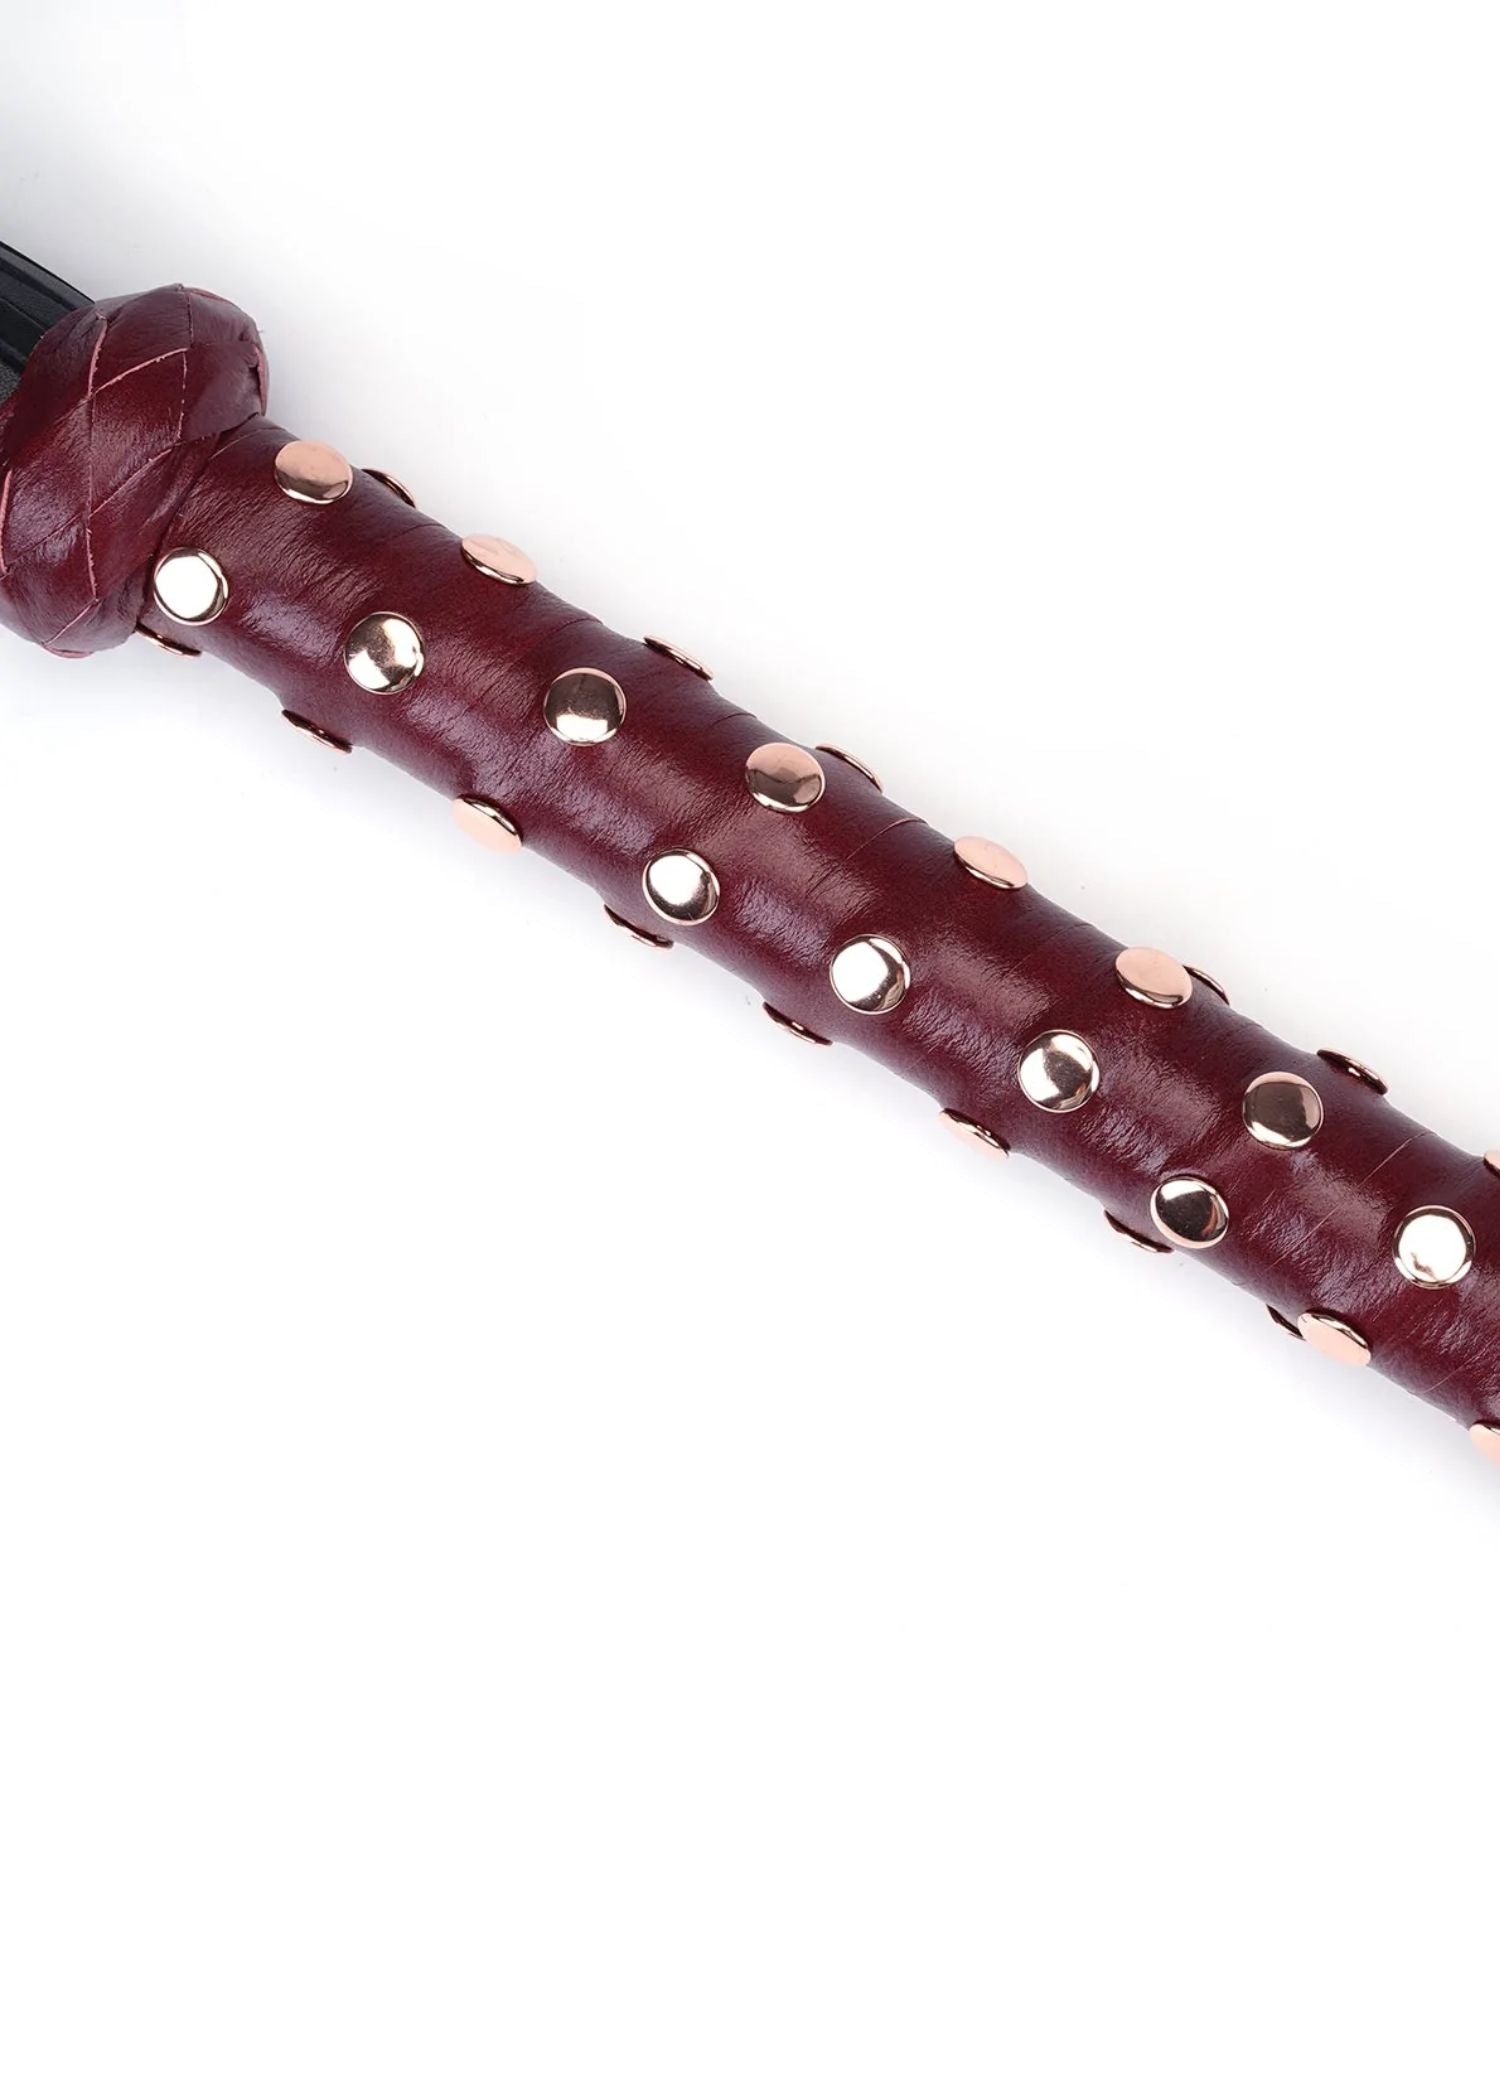 Liebe Seele Wine Red Flogger - Durable with Studded Handle - Bondage BDSM Sex Toy | Avec Amour